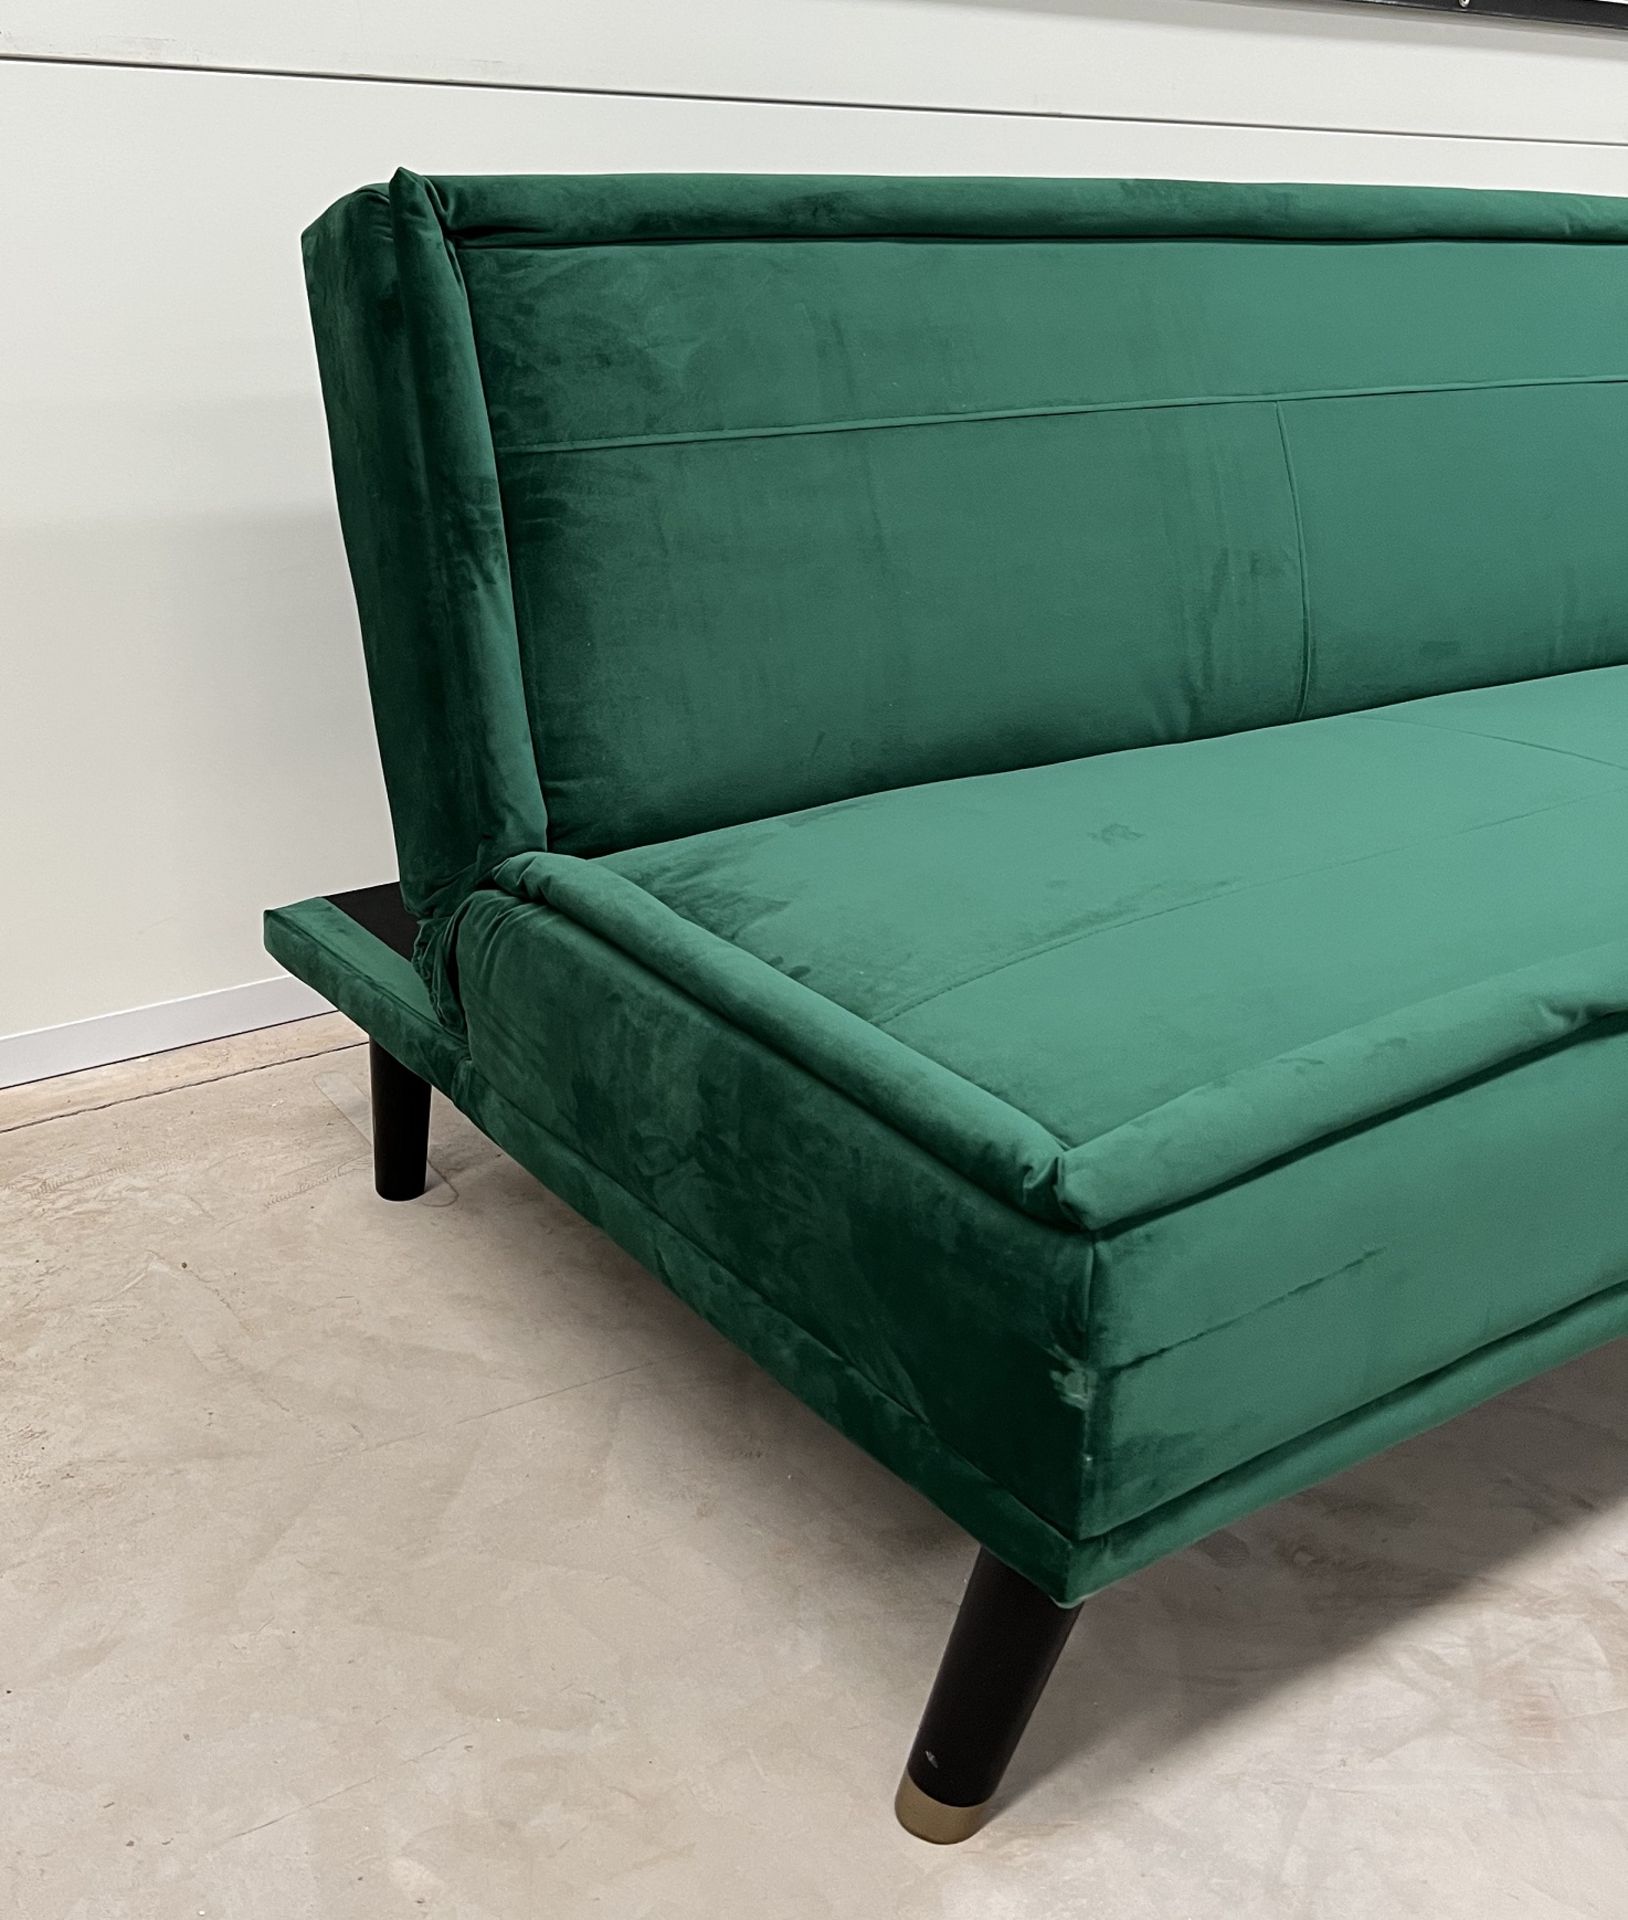 Green Velvet Upholstered Sofa Bed Is Ideal For Those Looking For A Sleek Space-Saving Design. In A - Image 3 of 3